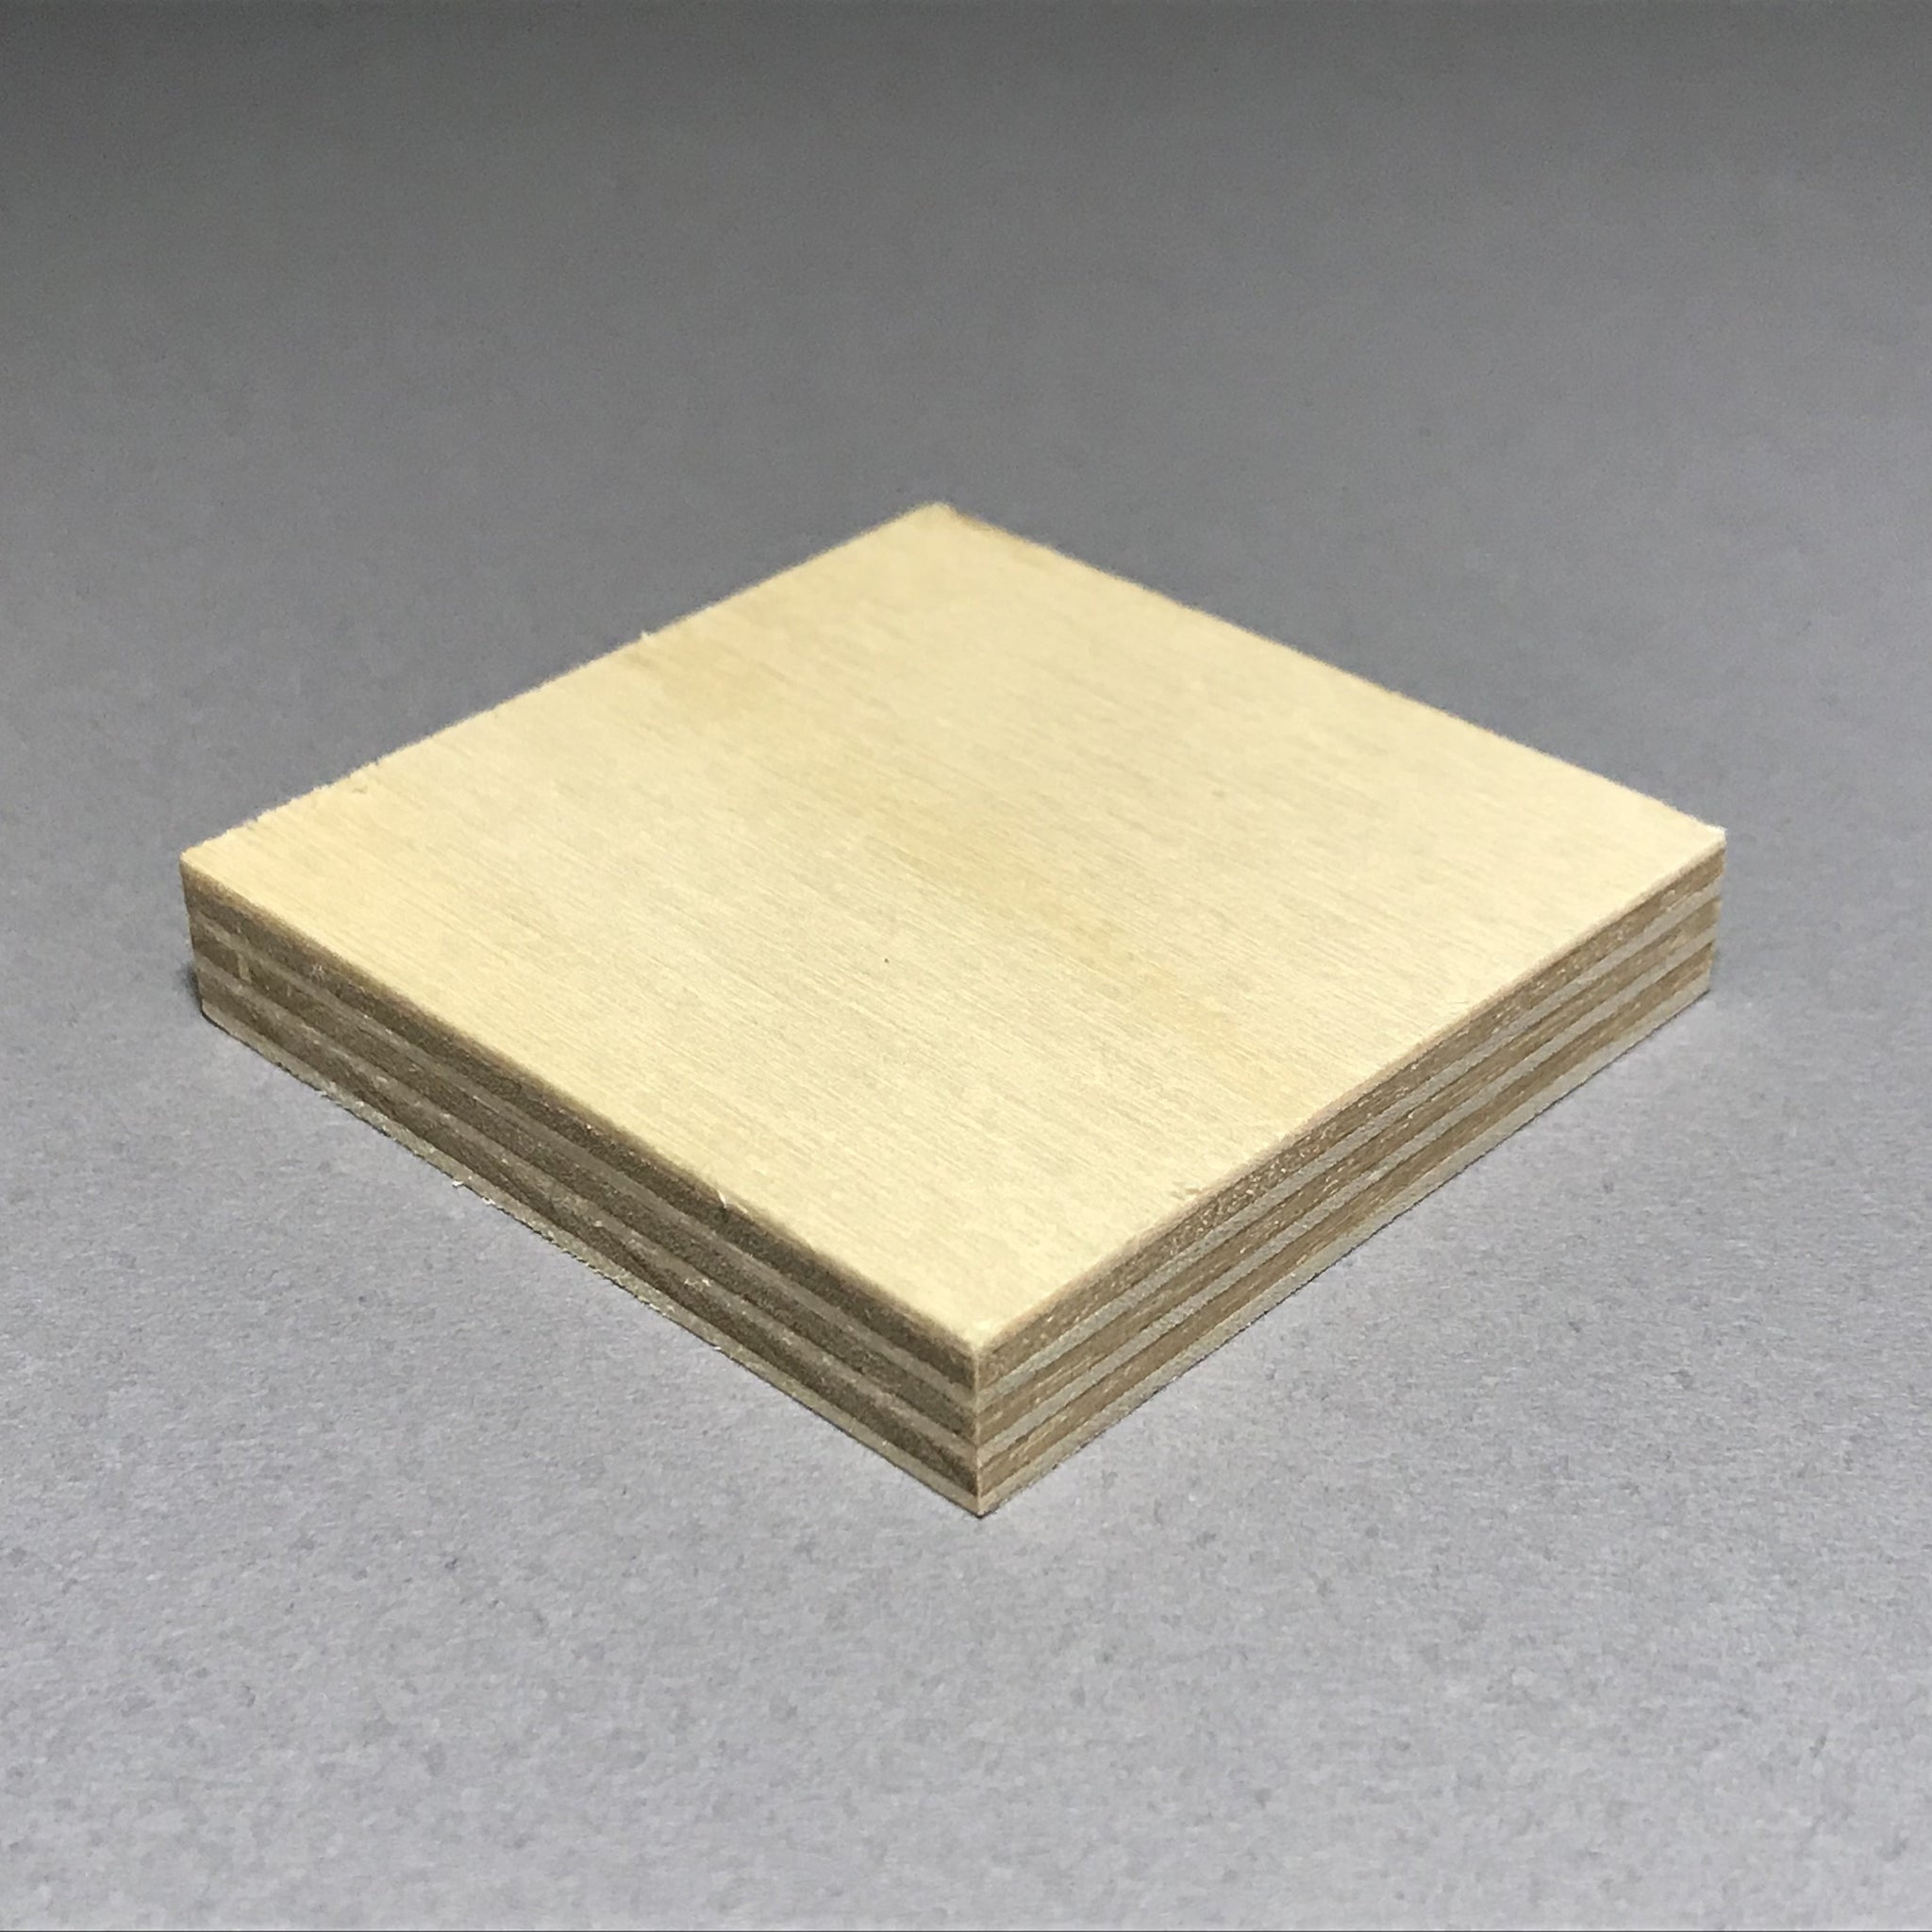 Woodpeckers Baltic Birch Plywood, 3 mm 1/8 x 10 x 10 inch Craft Wood, Box of 45 B/bb Grade Baltic Birch Sheets, Perfect for Laser, CNC Cutting and Wood Burning